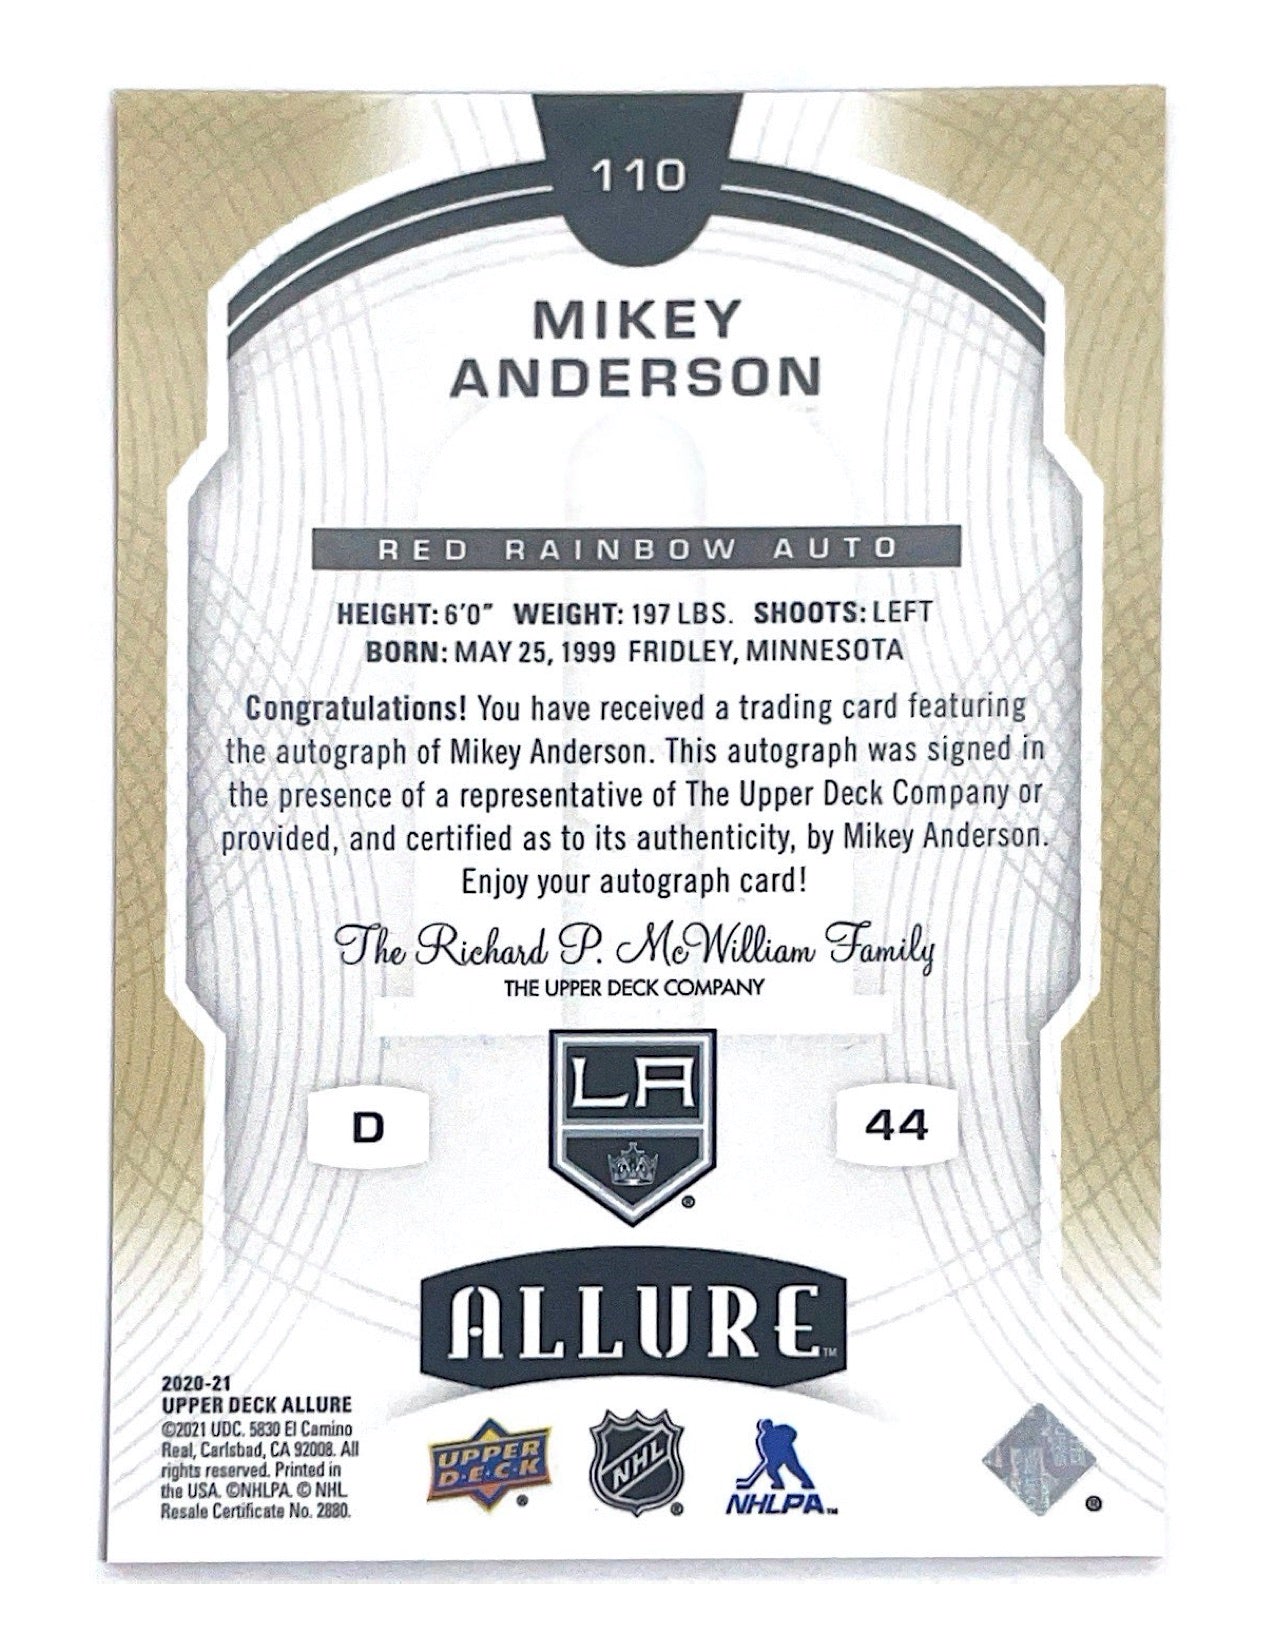 Mikey Anderson 2020-21 Upper Deck Allure Rookie Red Rainbow Autograph #110